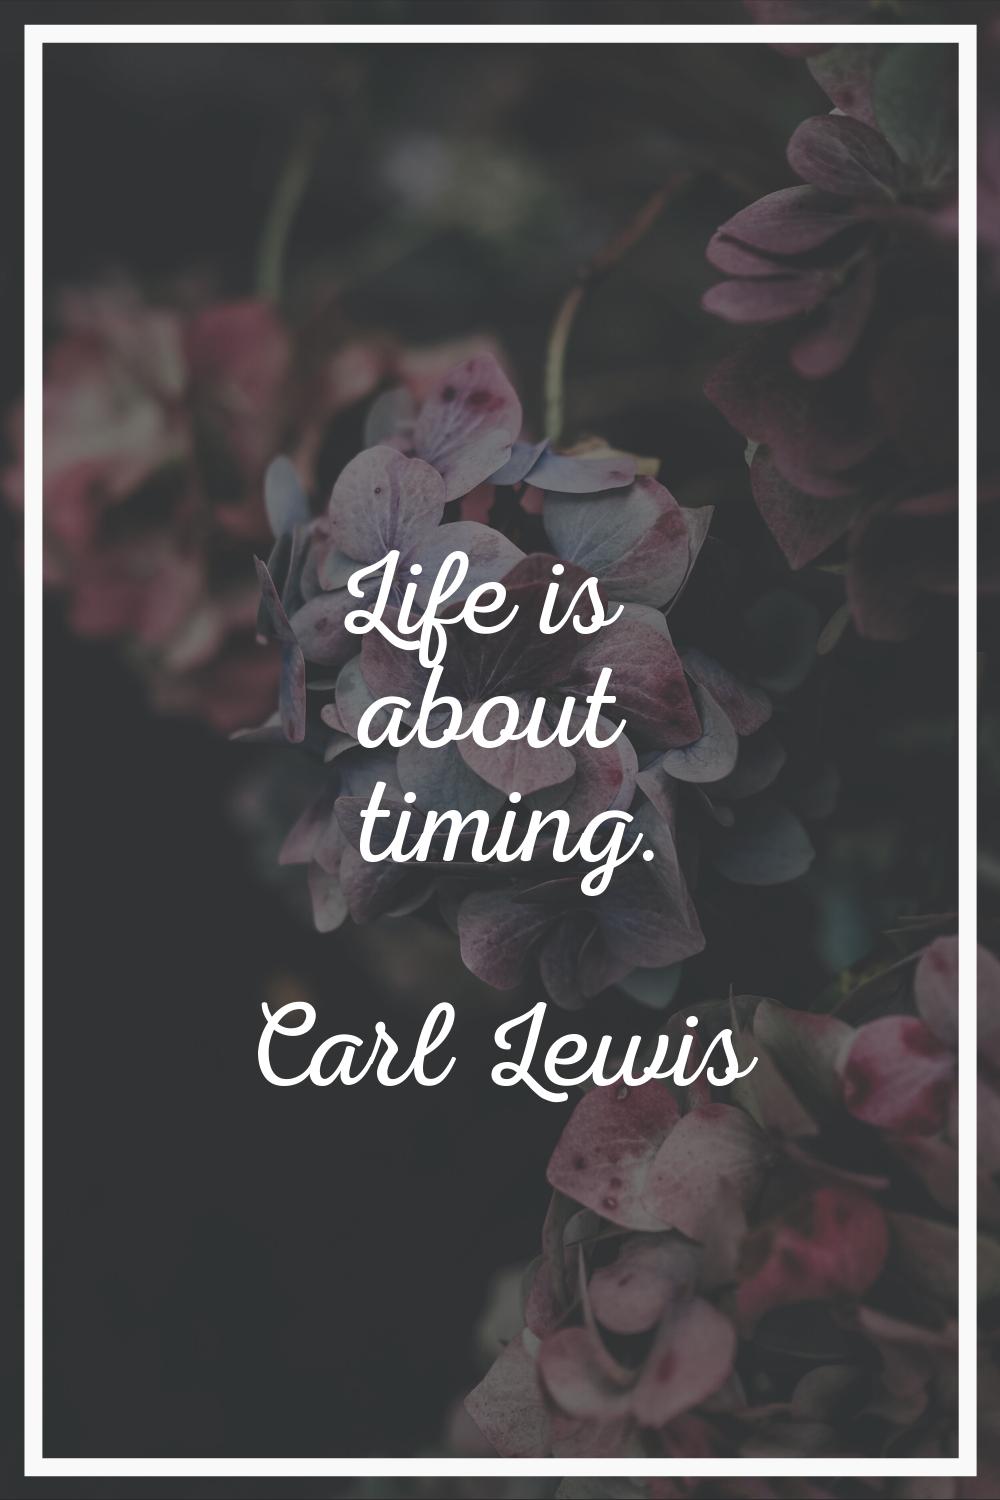 Life is about timing.